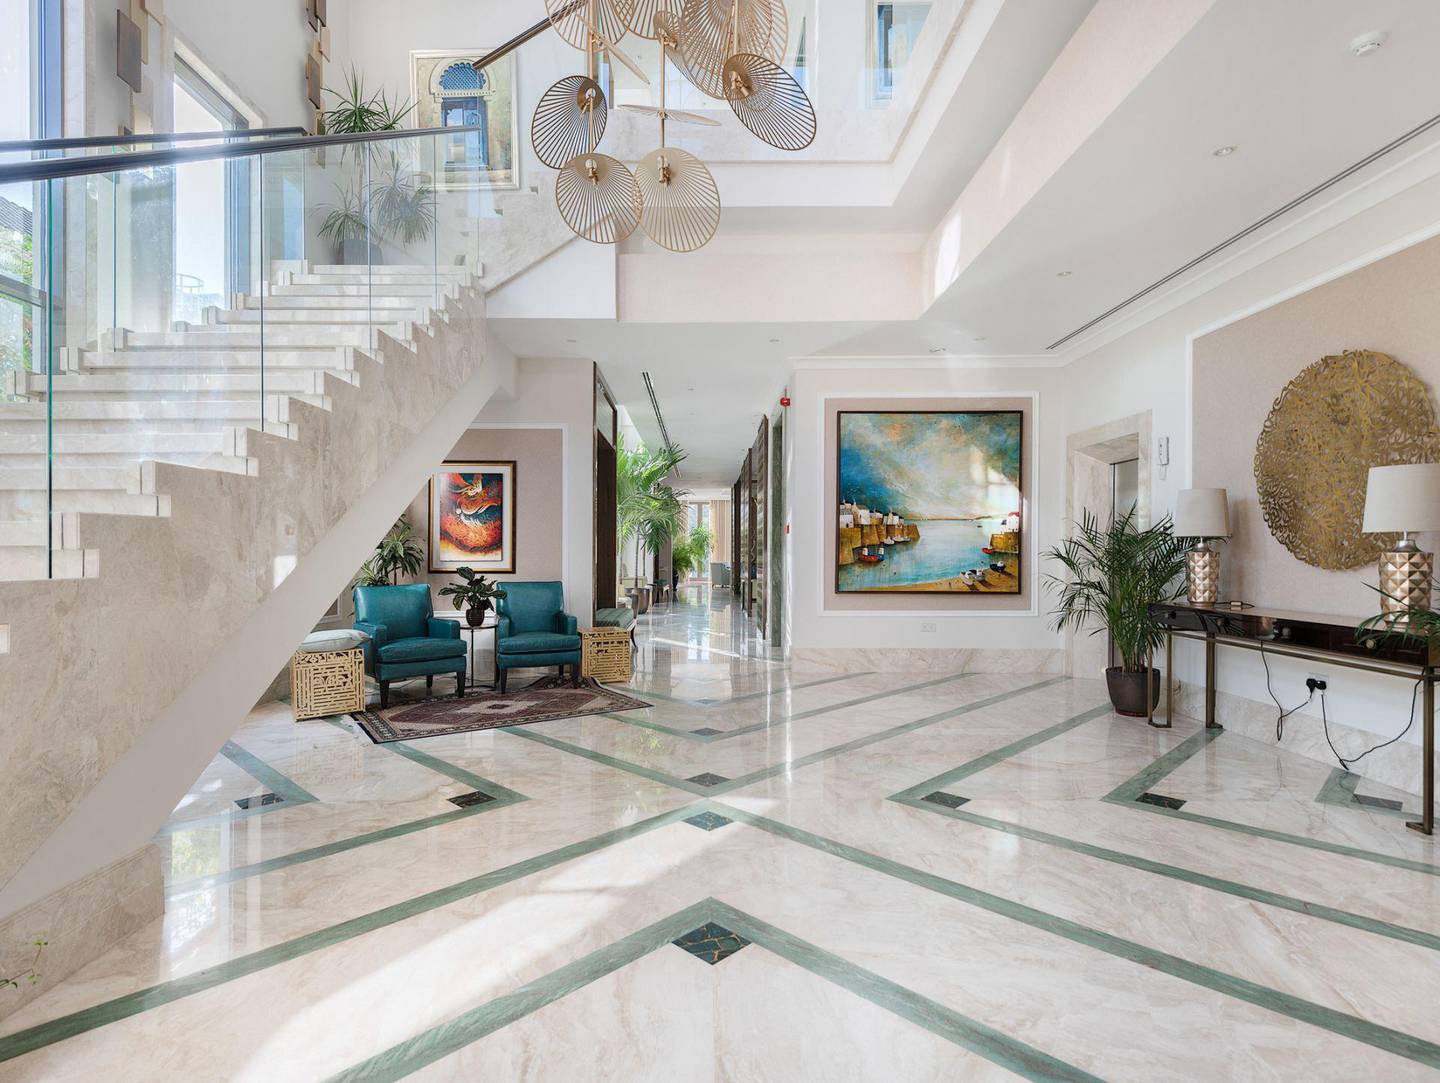 The triple-height ceiling in the entrance hall. Courtesy Luxhabitat Sotheby's International Realty